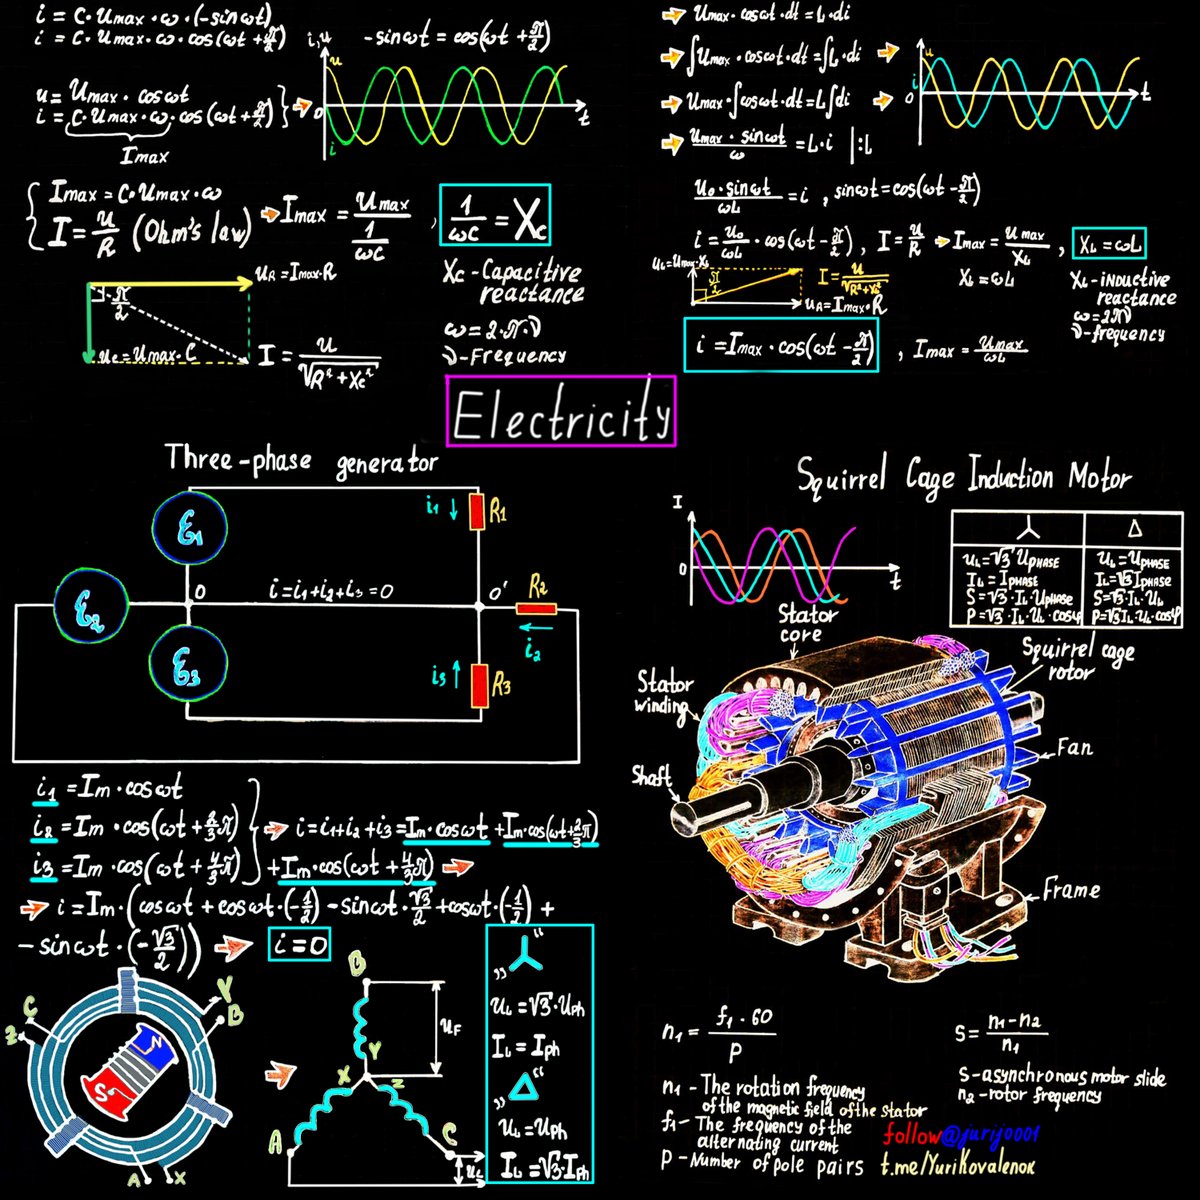 Electrical engineering notes 
#physics #art